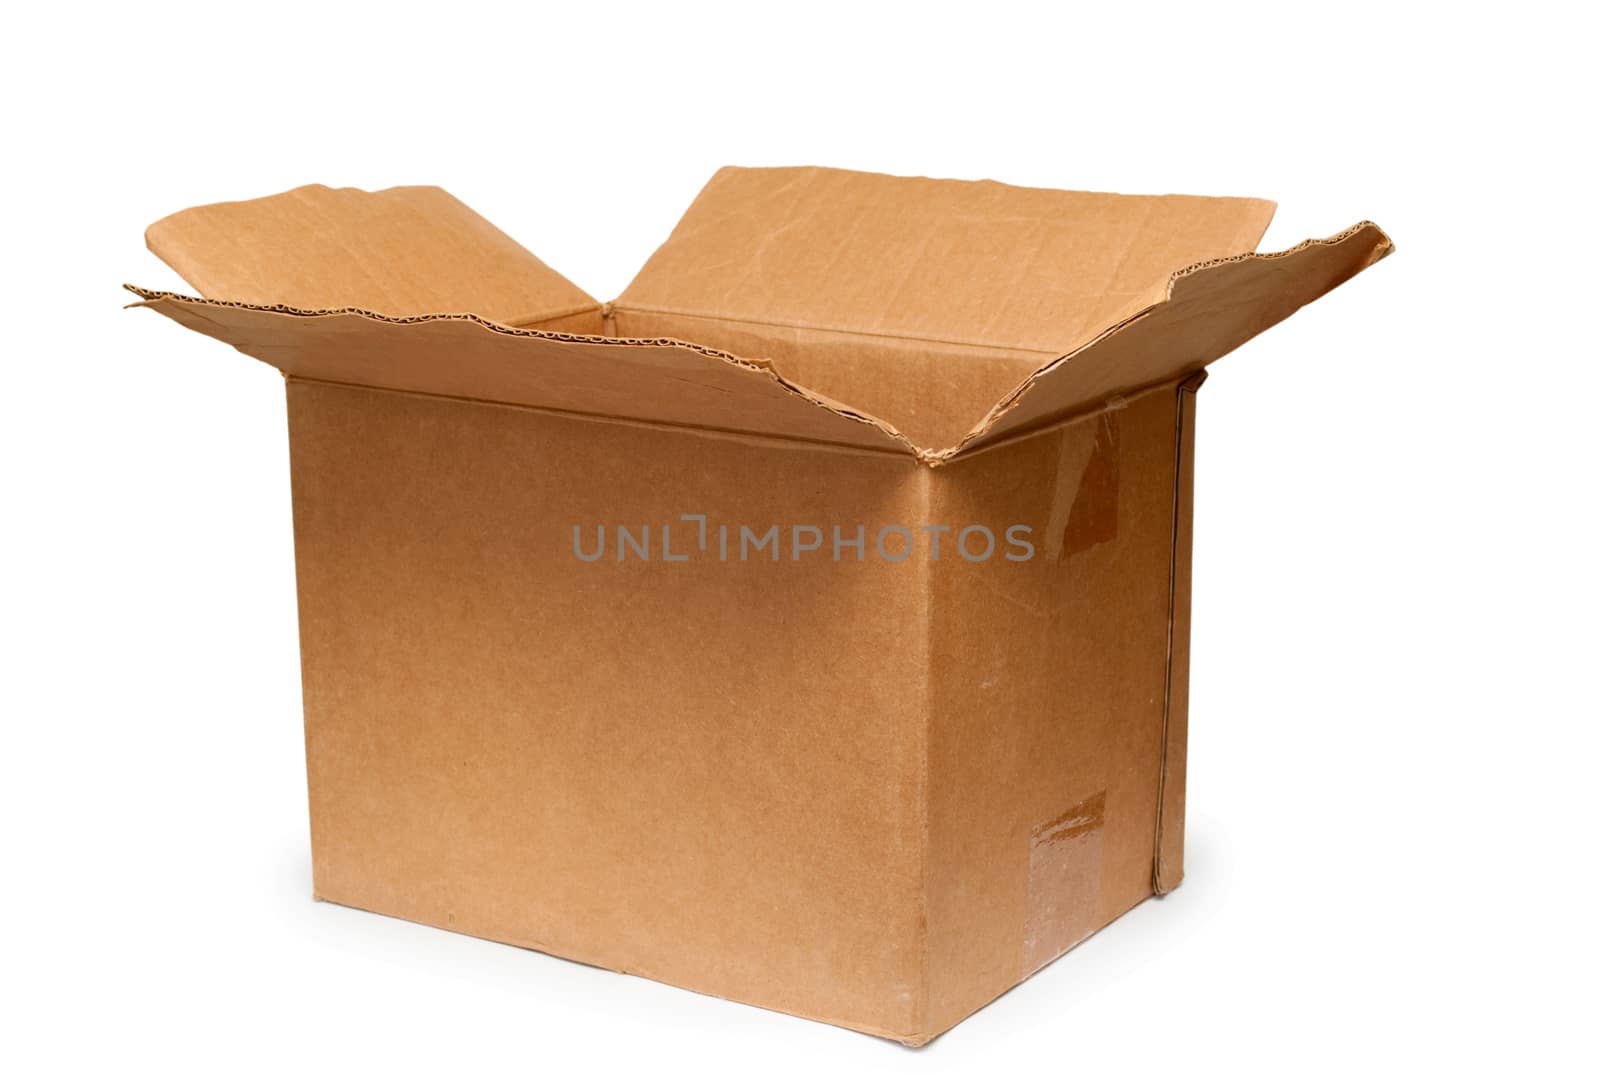 Cardboard box on a white background close up